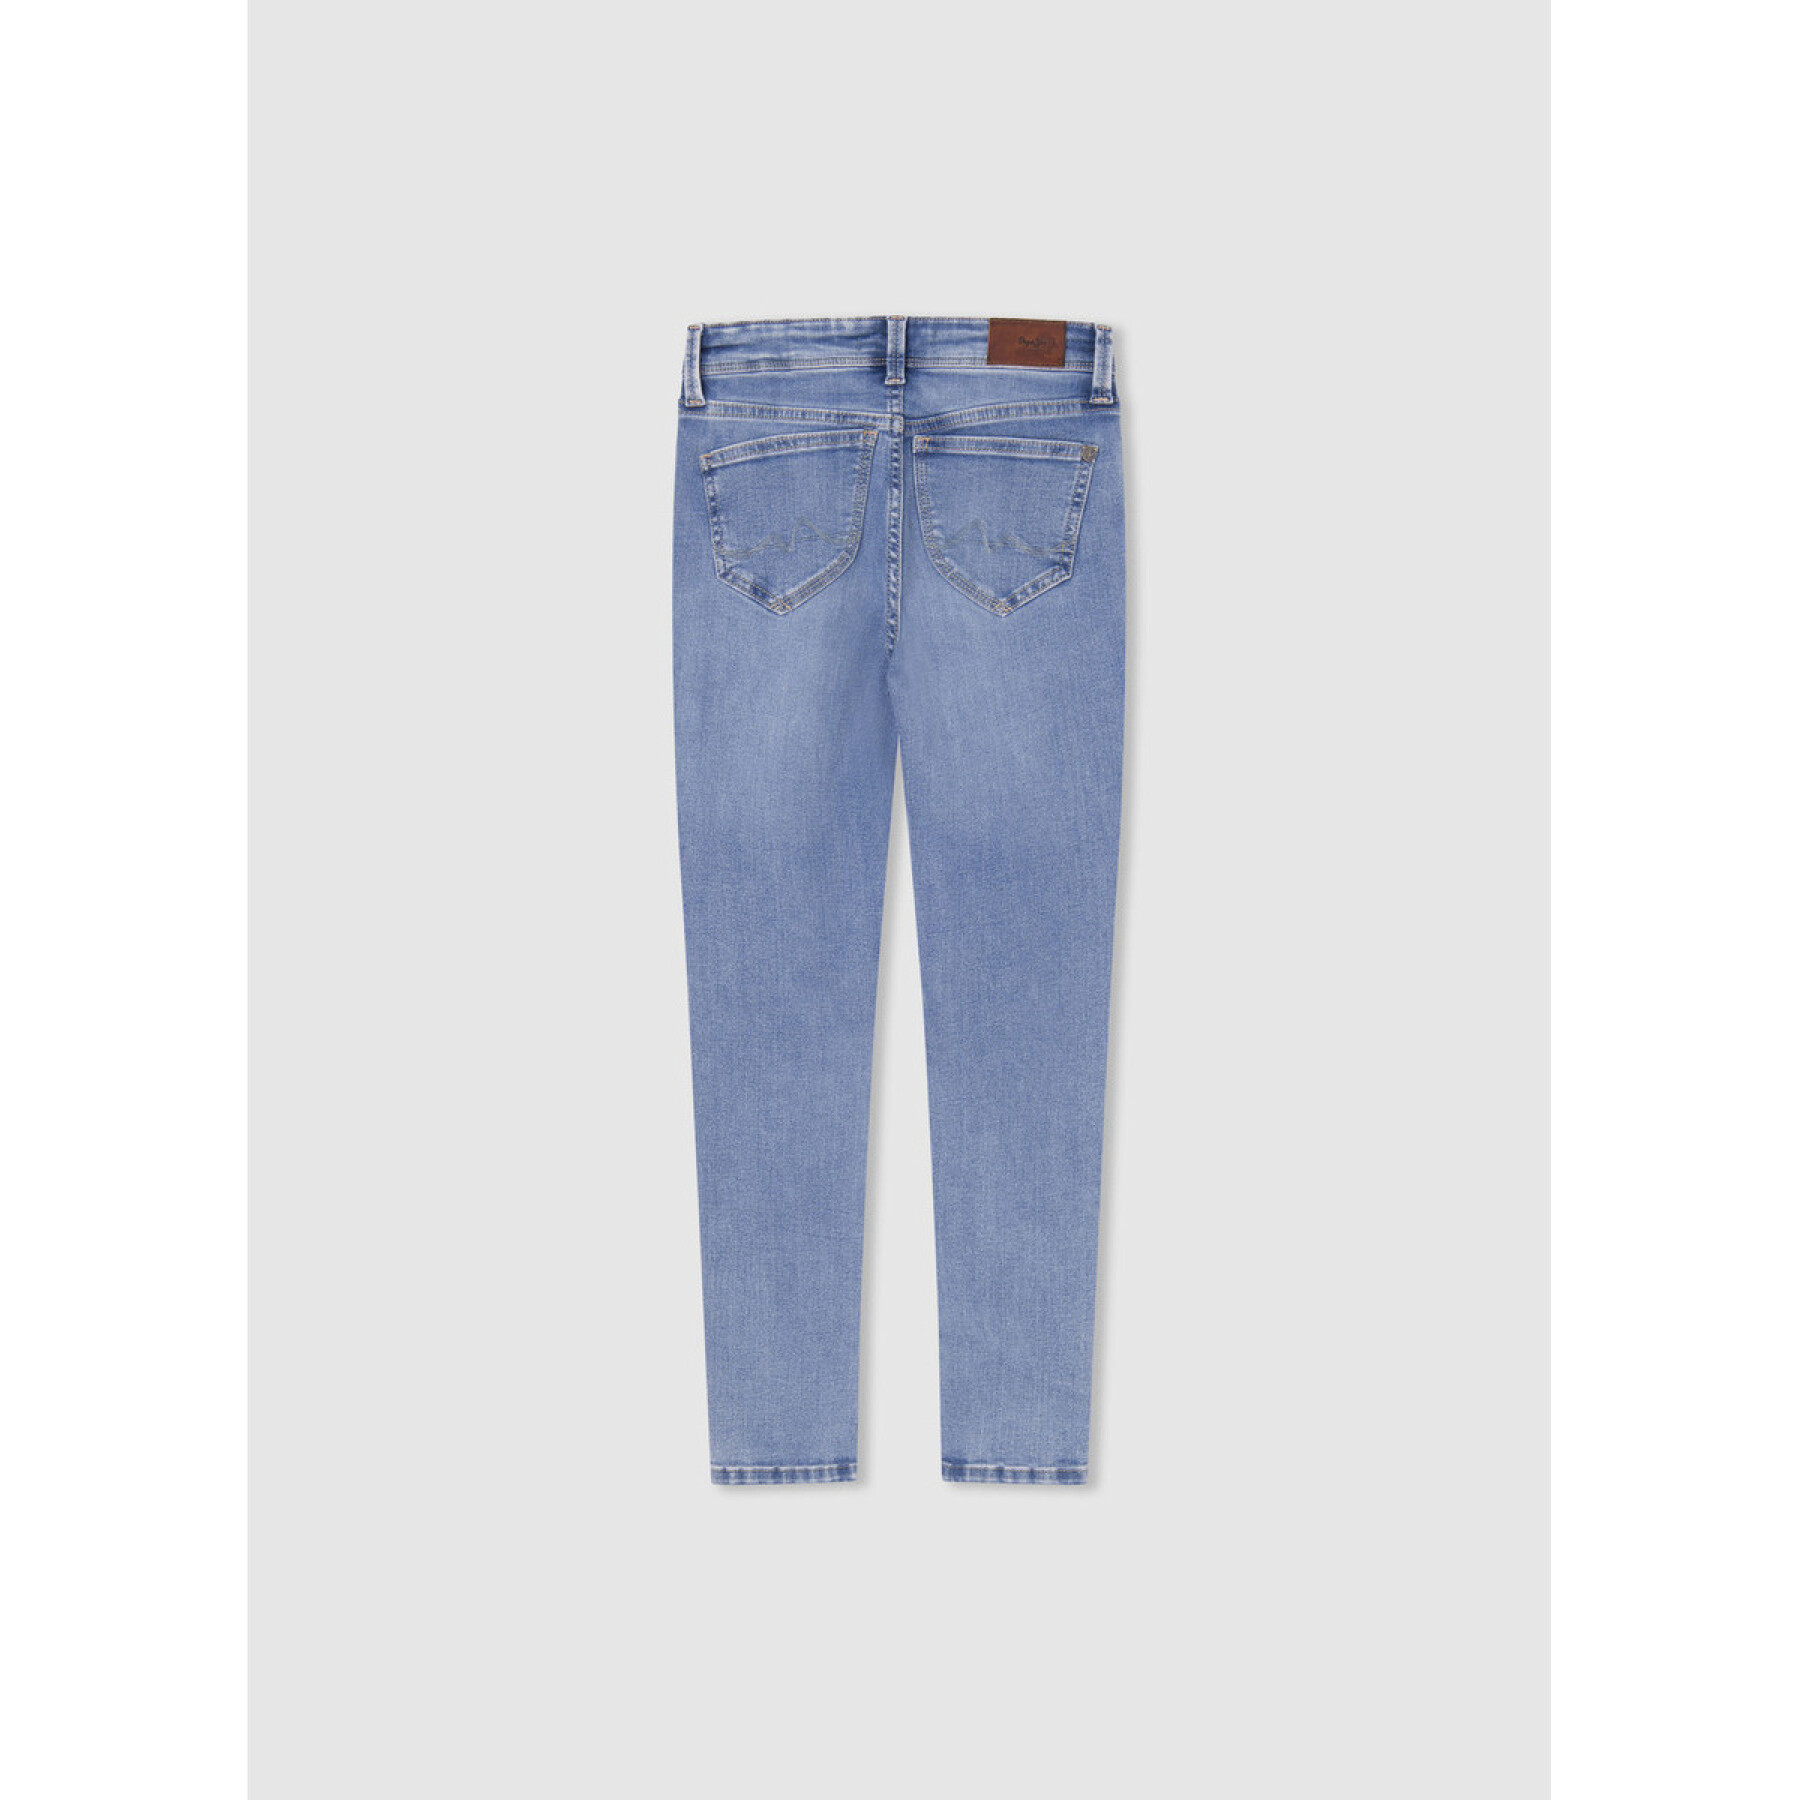 Skinny Jeans, Mädchen Pepe Jeans